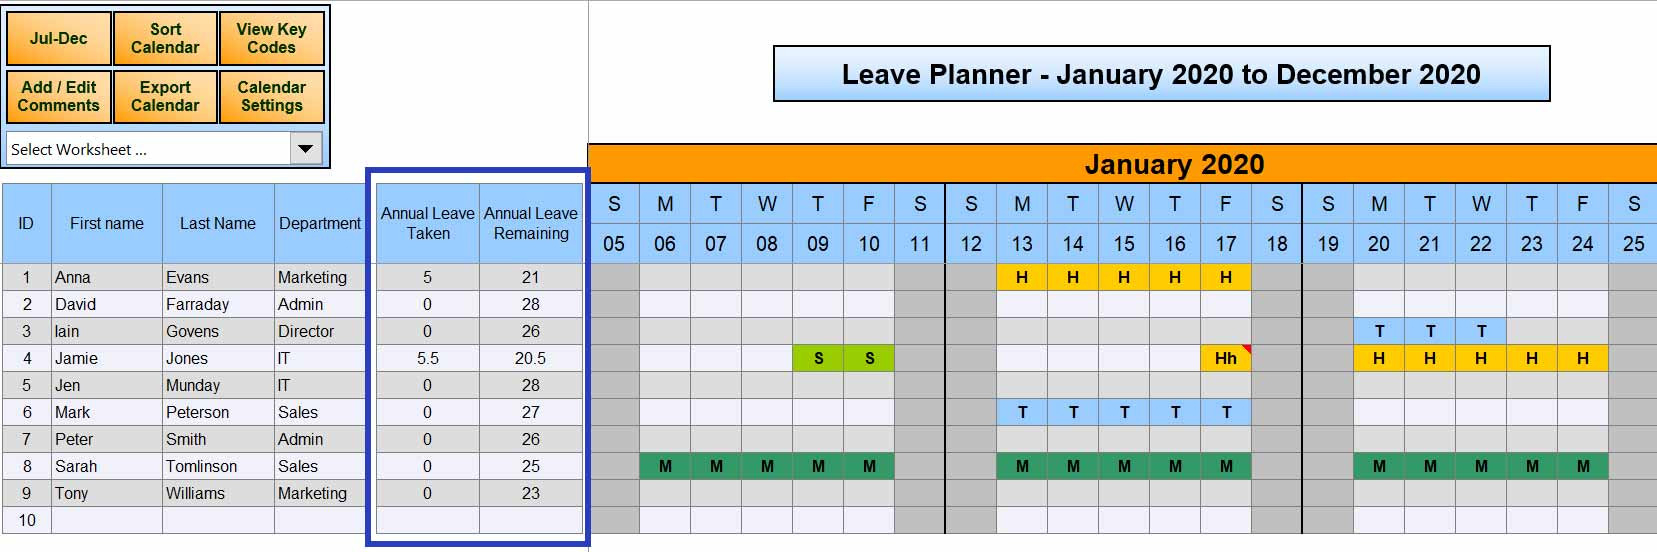 4+Company Staff Holiday Planner Template Excel 2021-Employee Vacation Calendar Template 2021